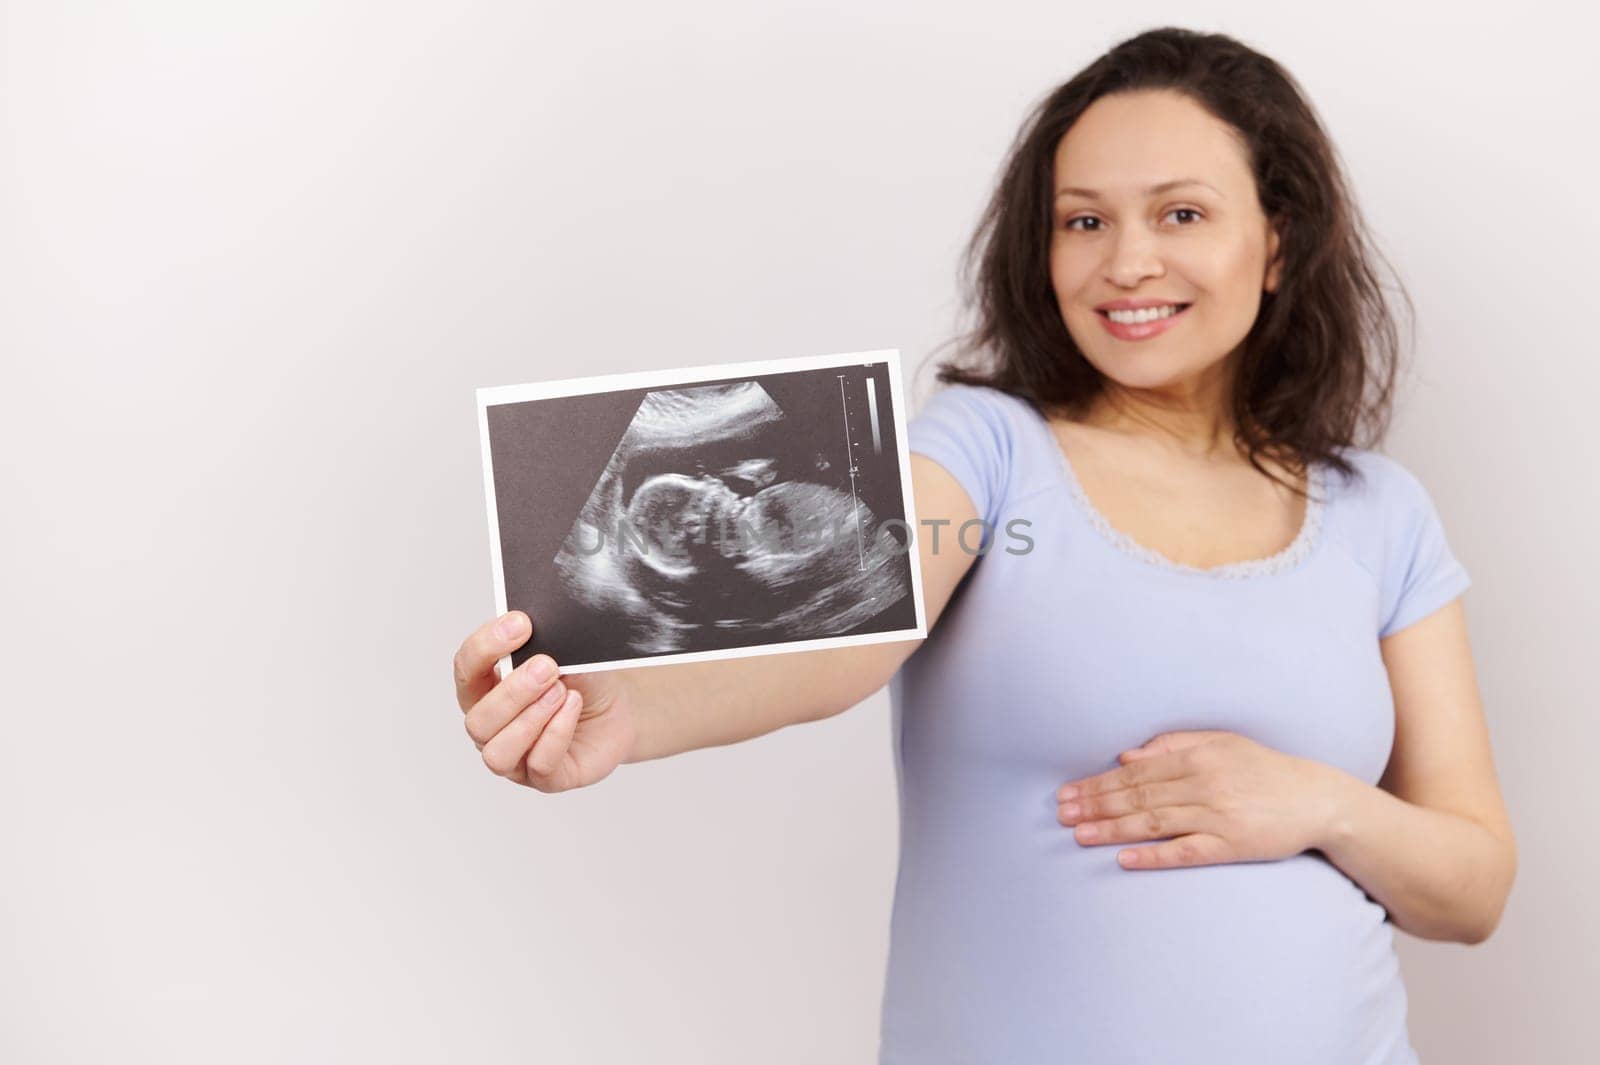 Focus on ultrasound scan image, baby sonography in the hand of a smiling pregnant woman, isolated on white background by artgf